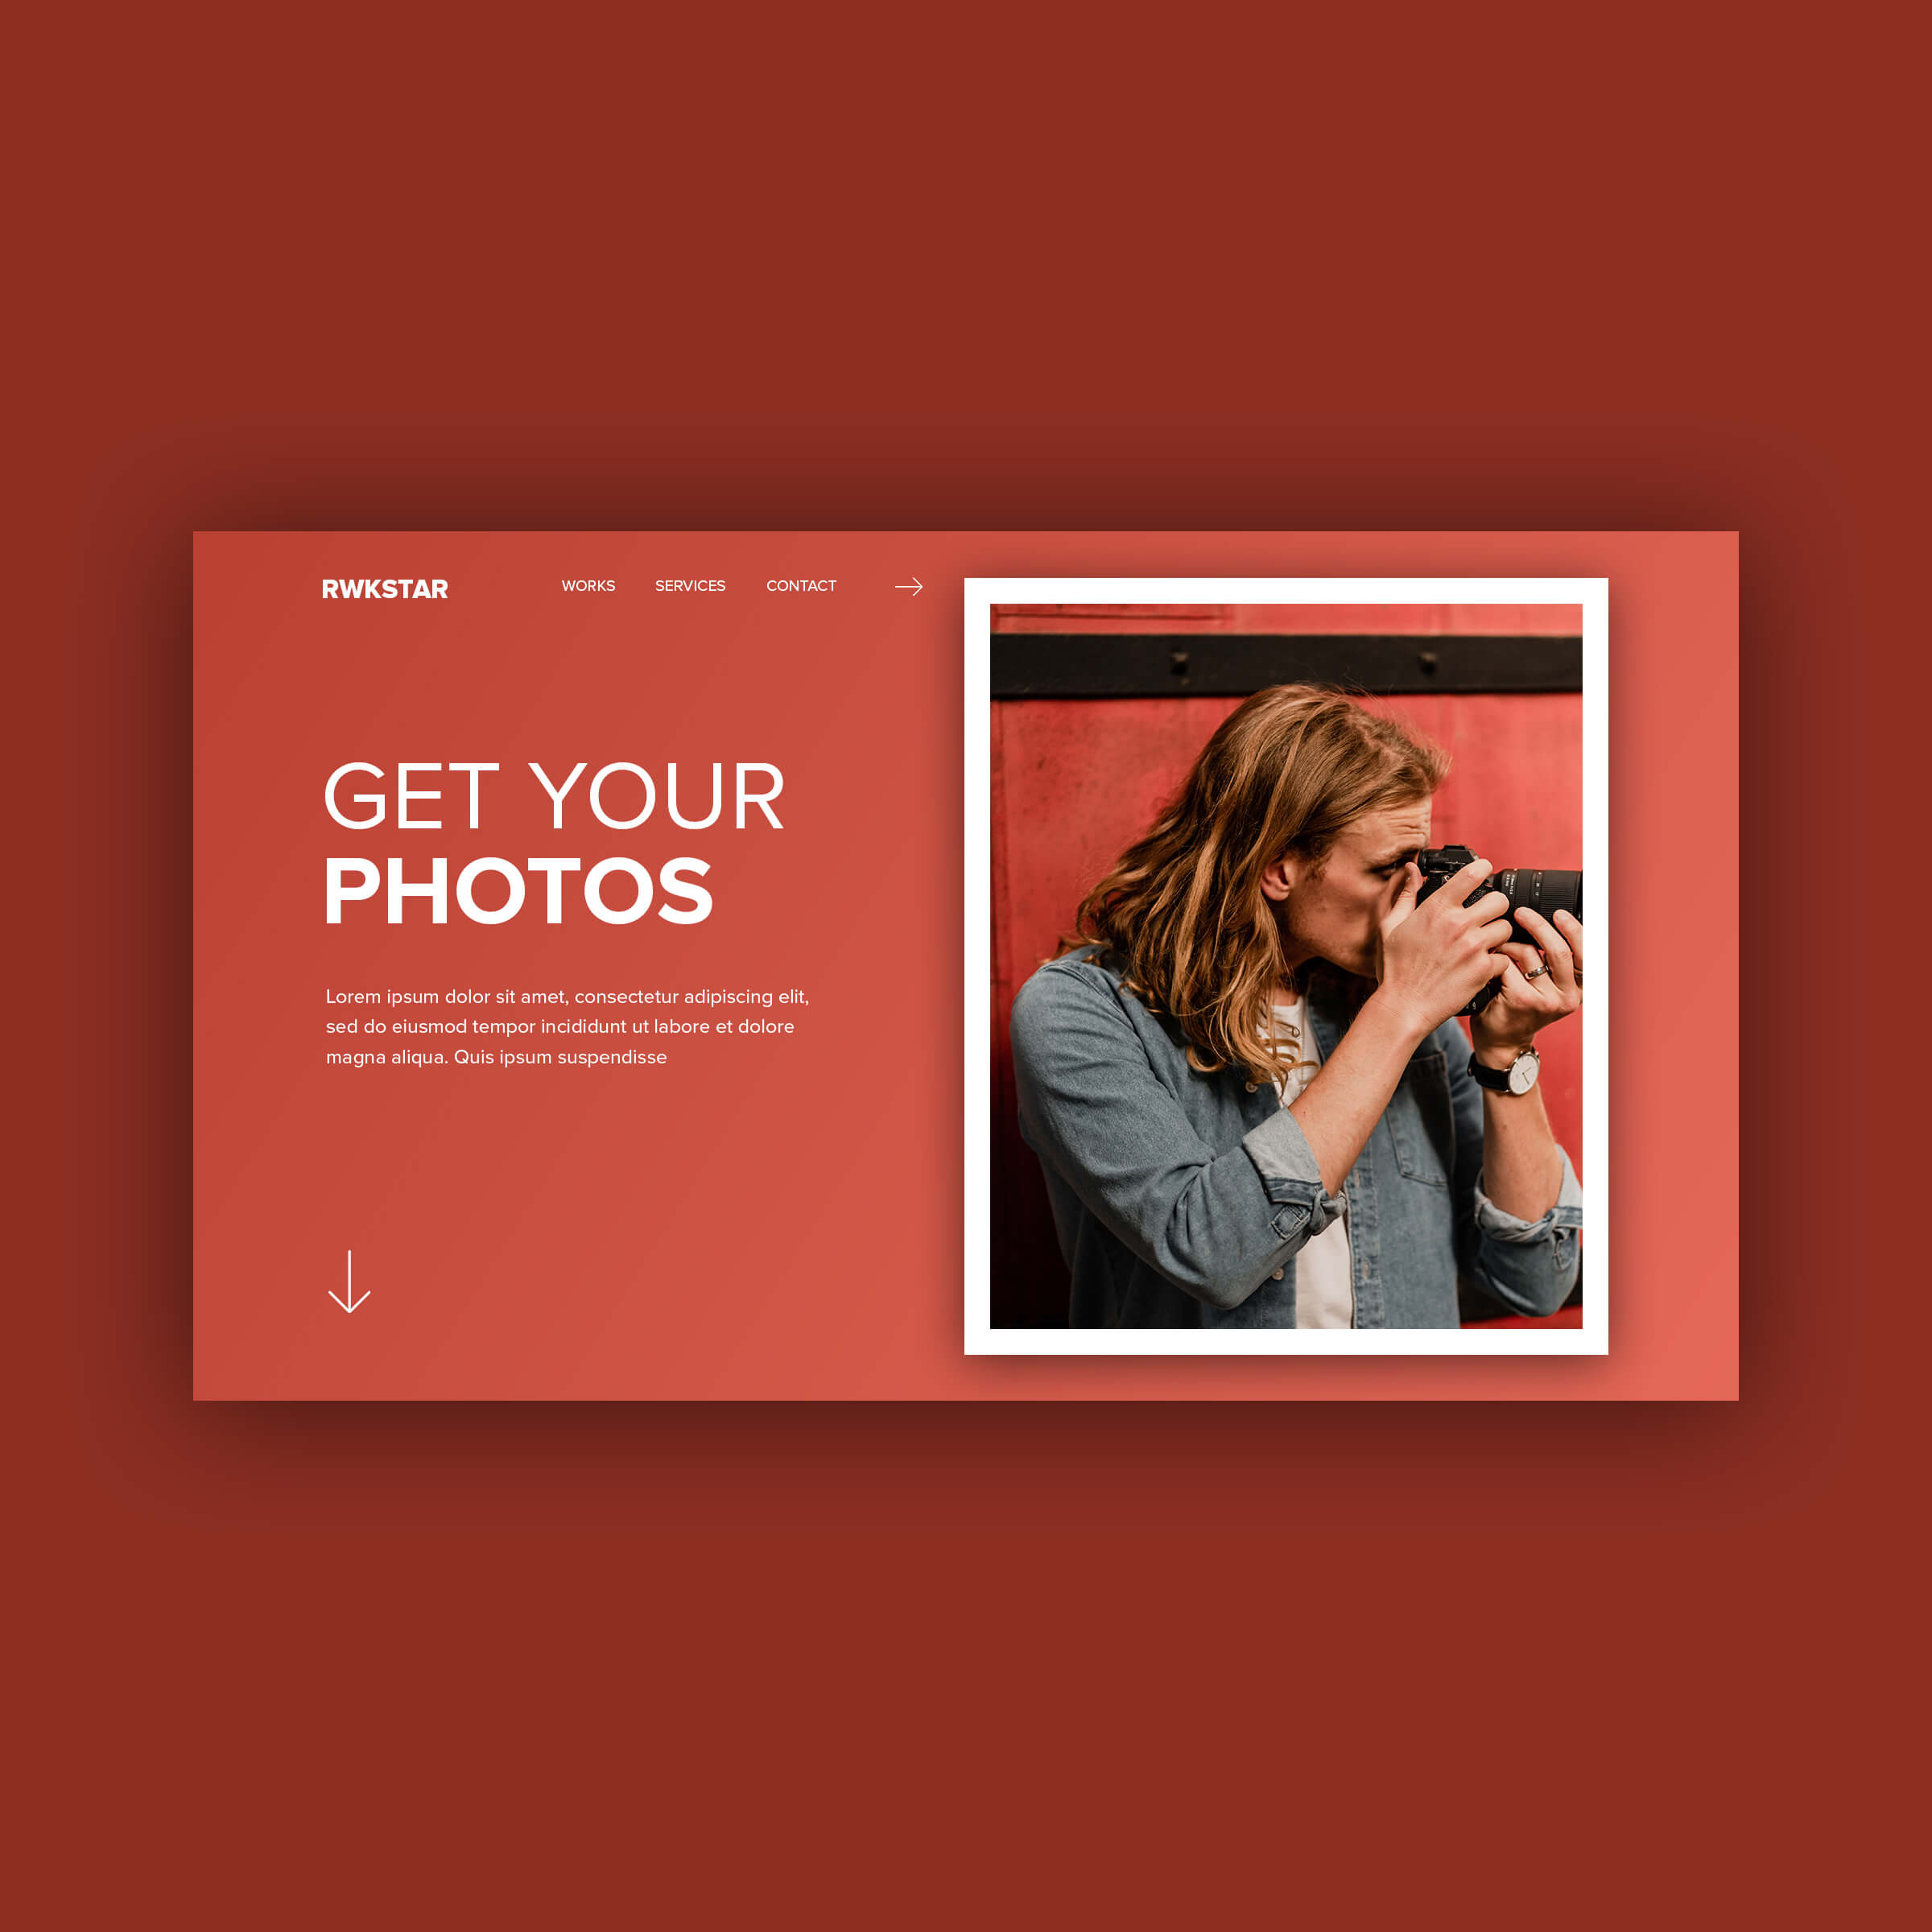 website templates photography